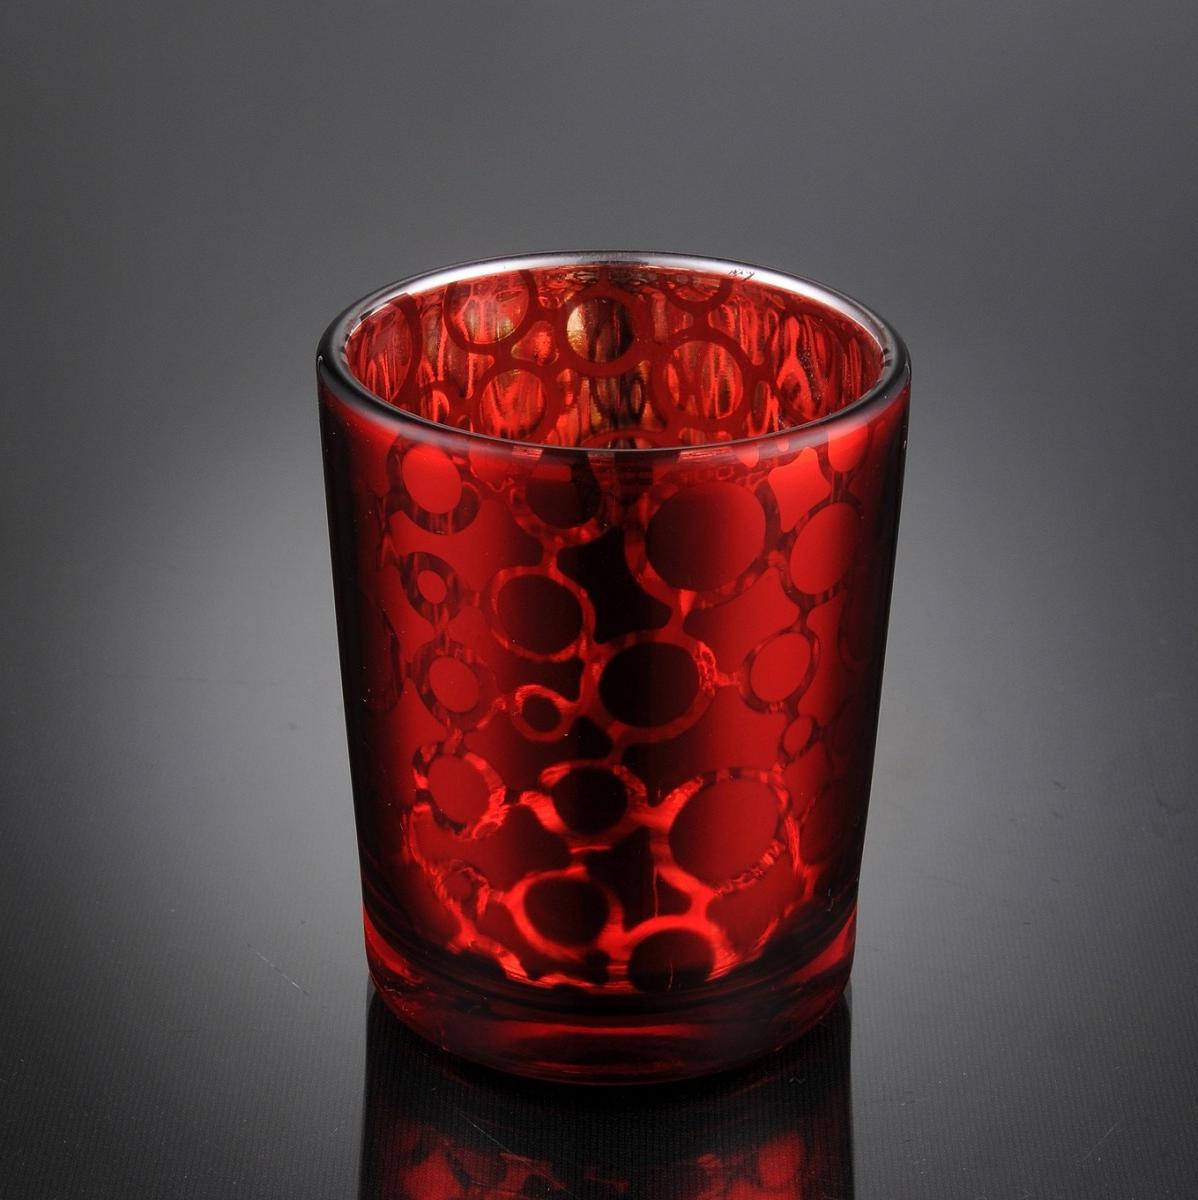 Case of 72. Votive Candle Red Design  Case of 72 